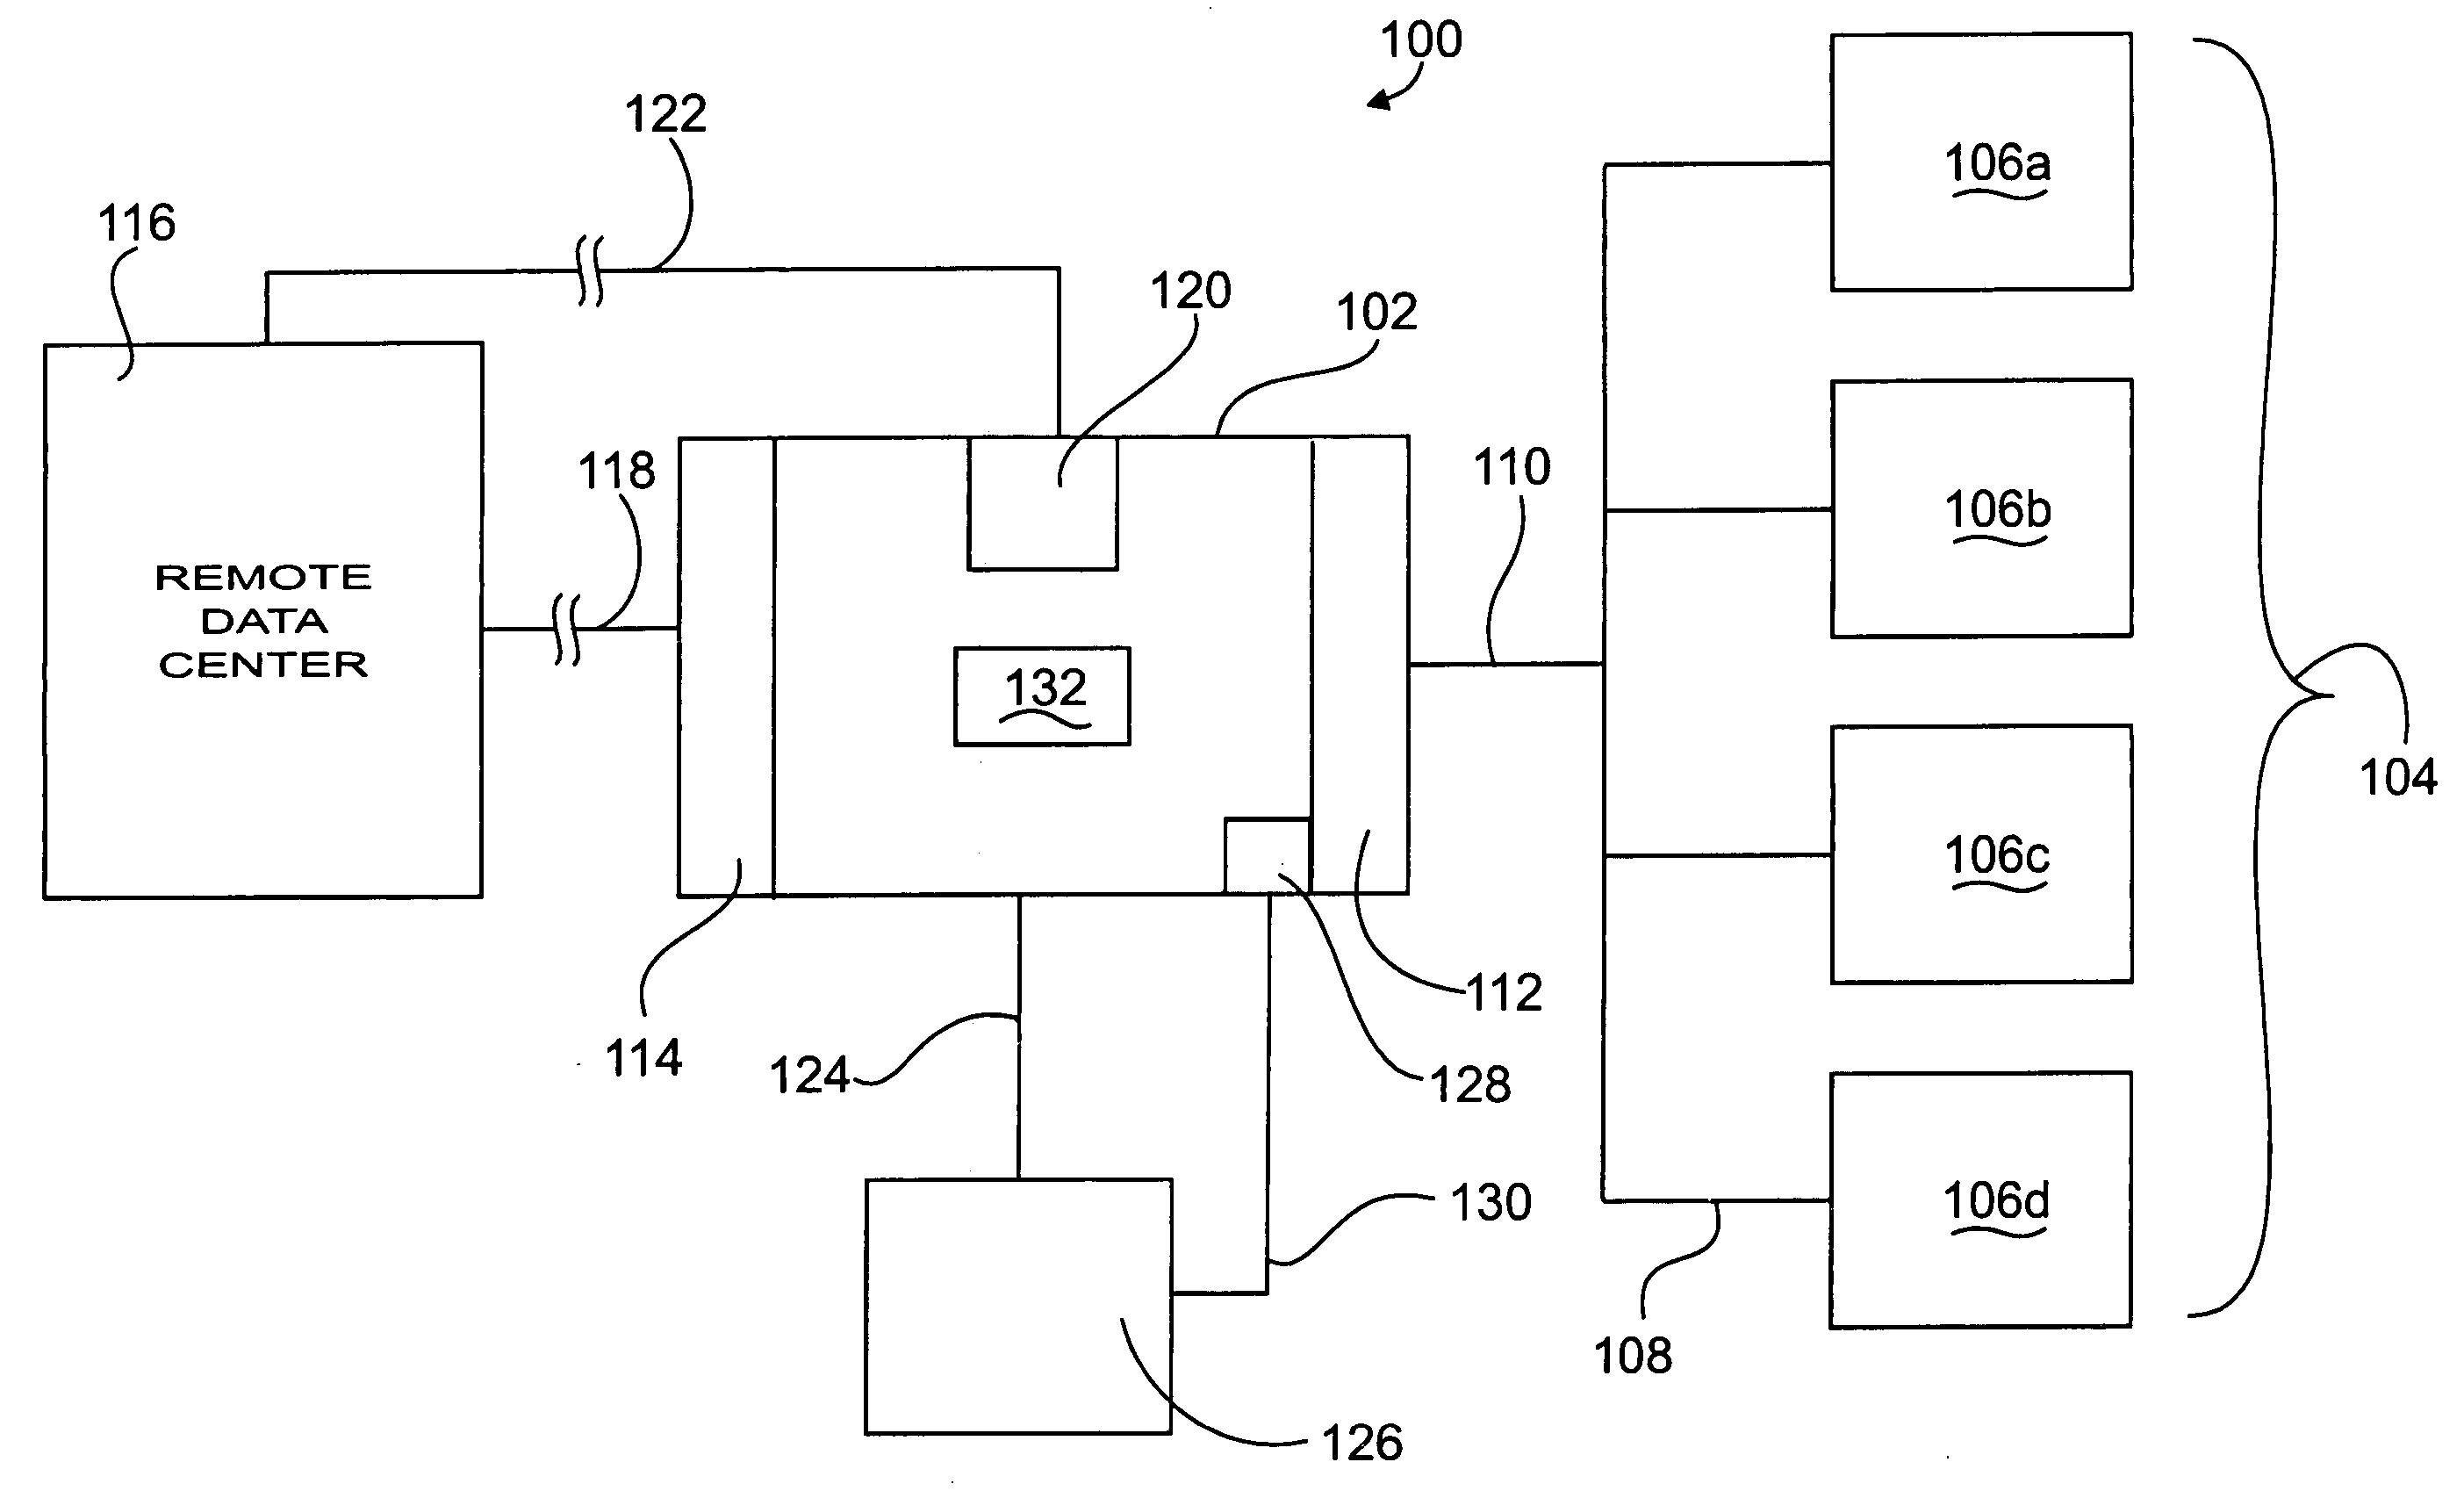 Apparatus and method for remotely monitoring a computer network